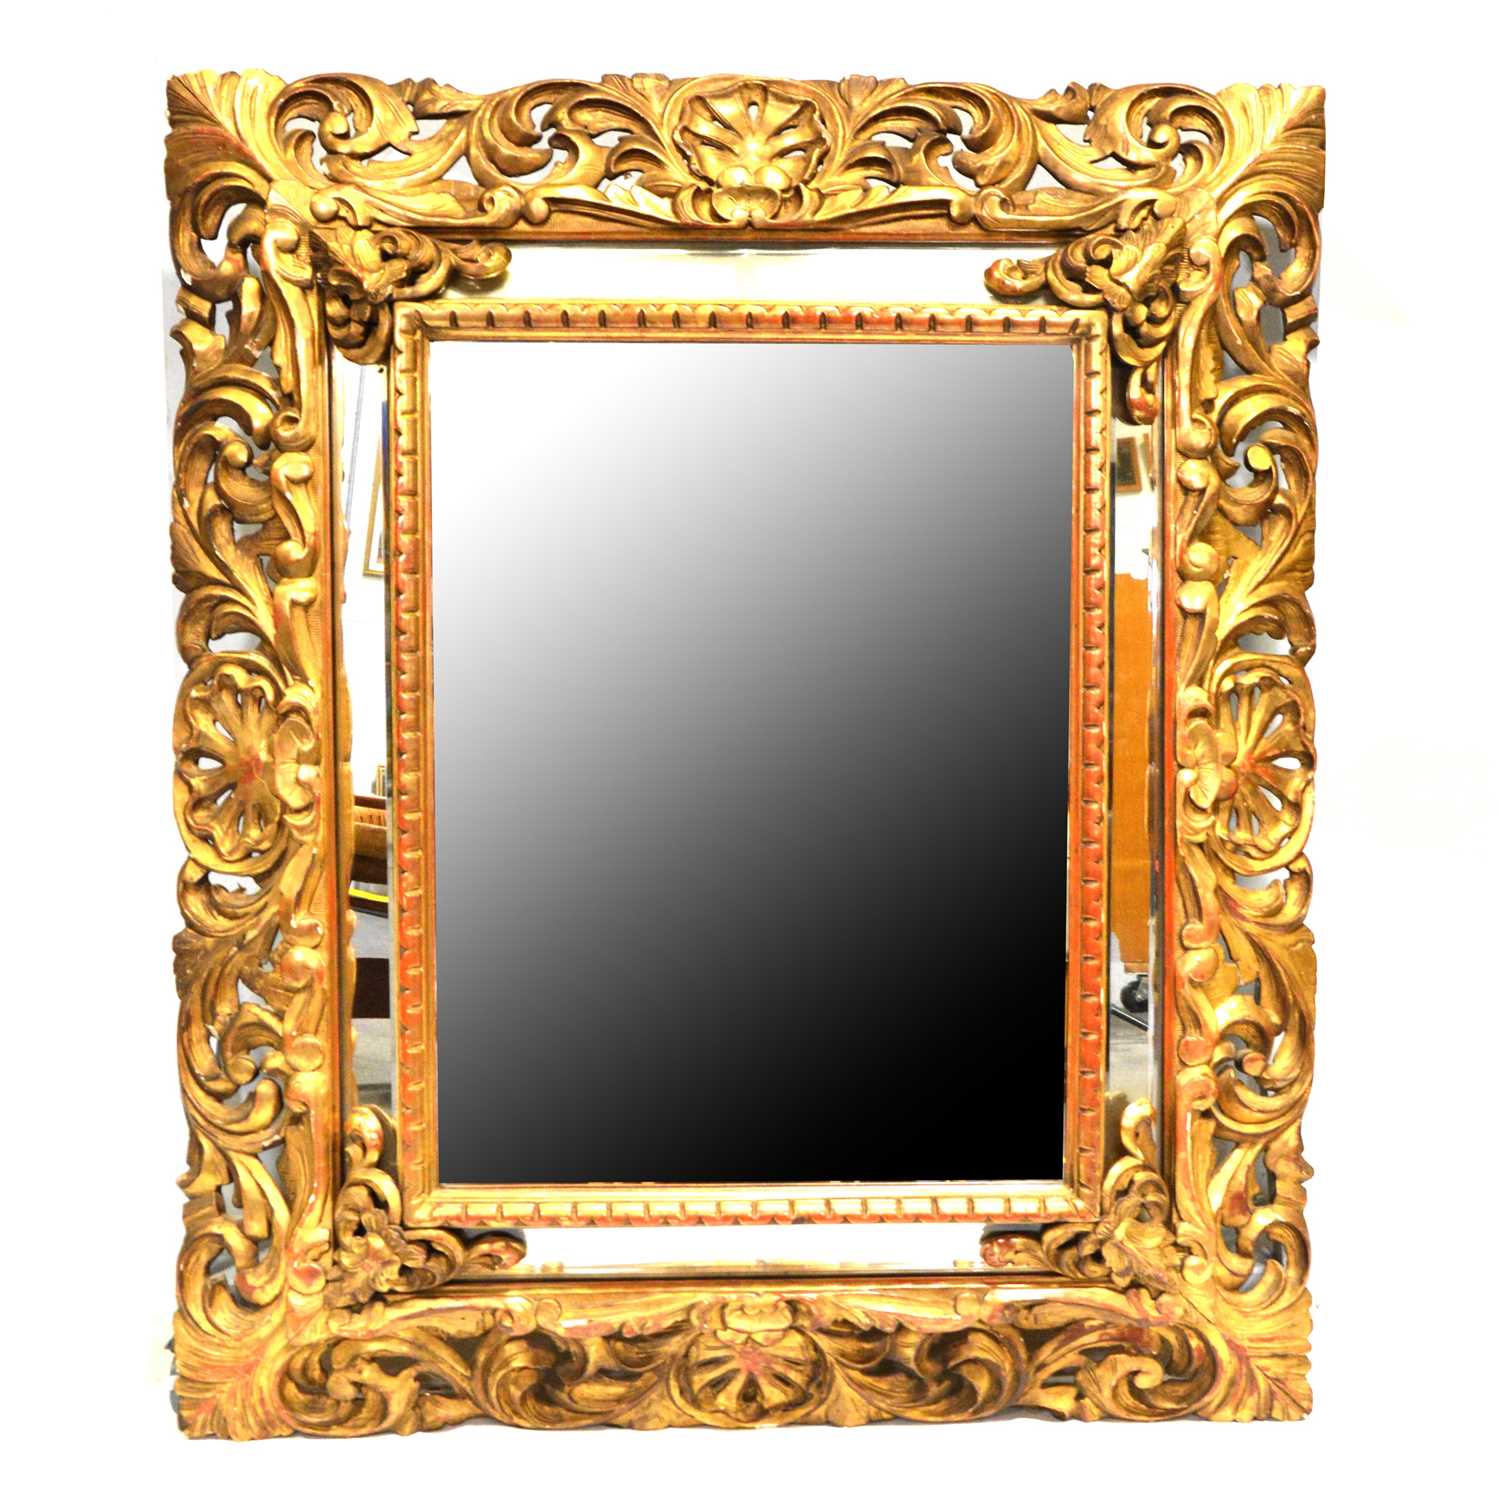 Large carved wooden gilt gesso cushion wall mirror, 19th Century,